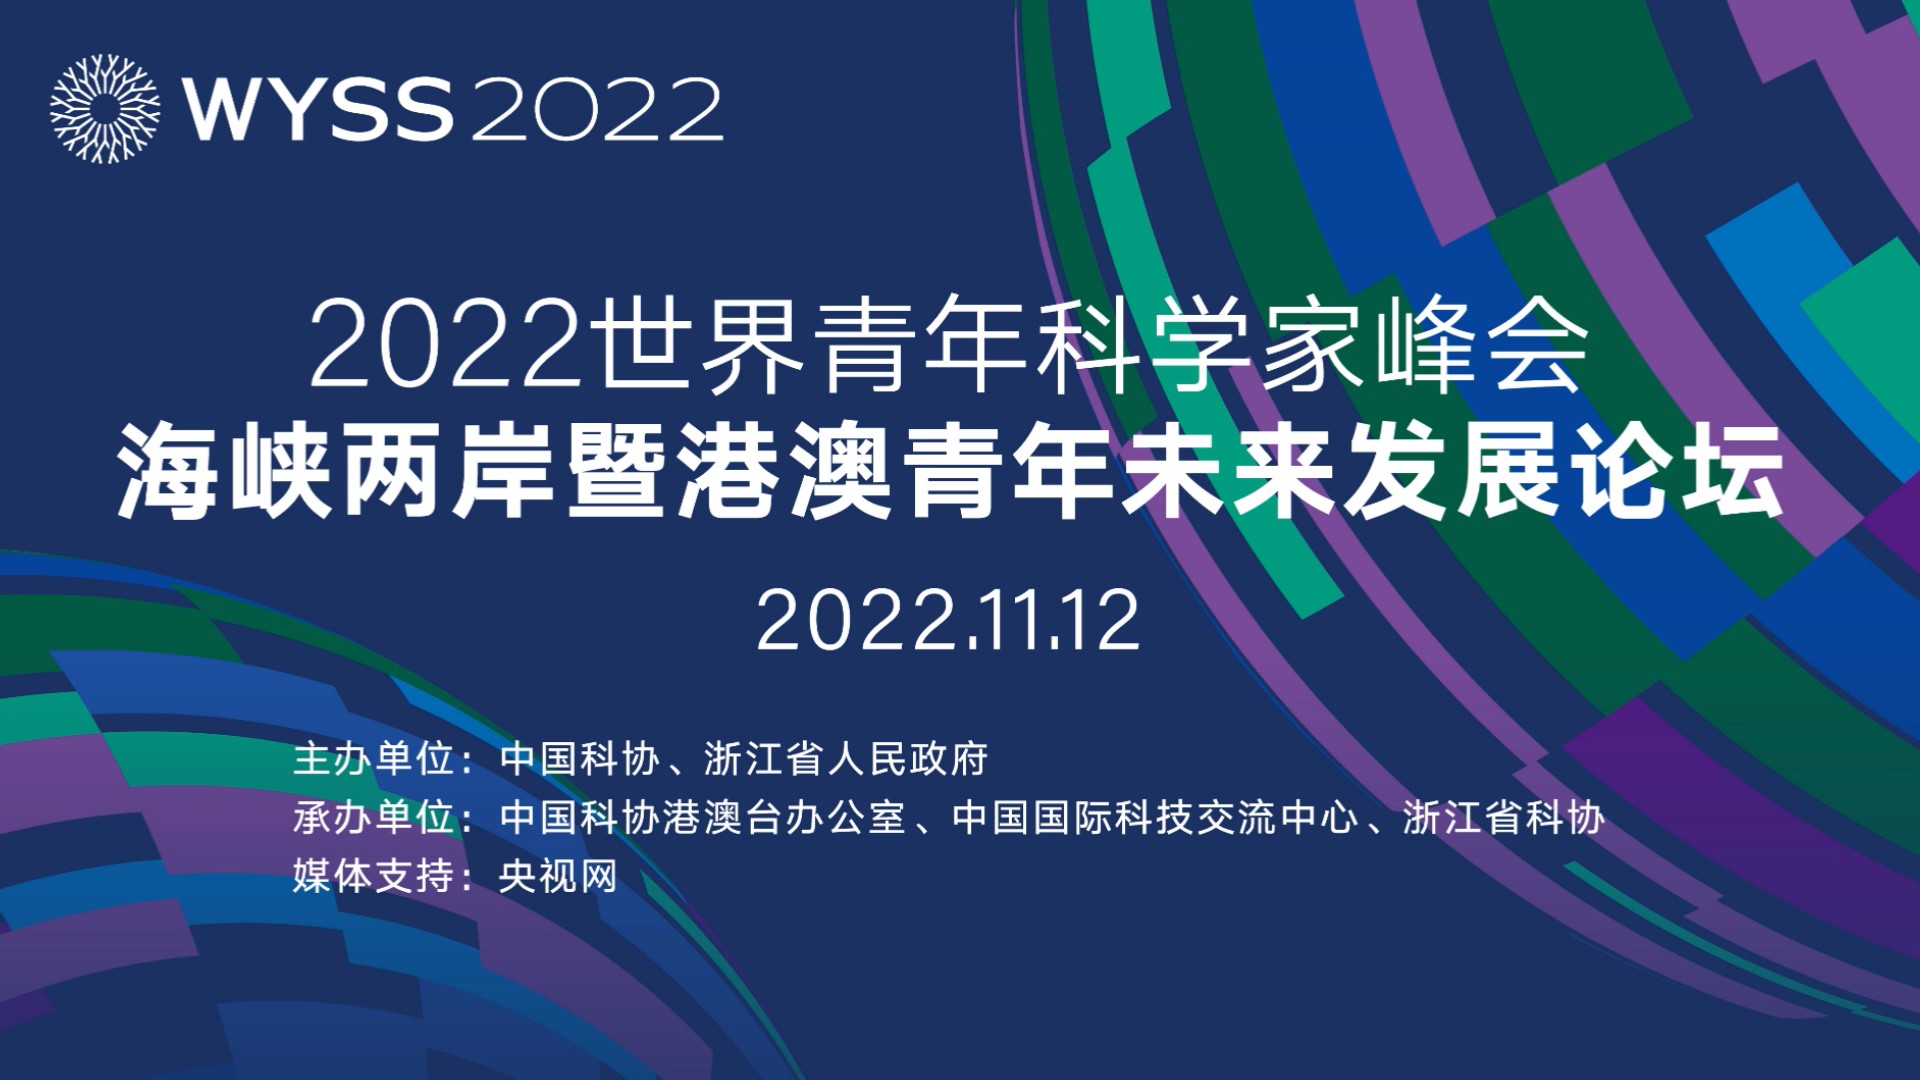 WYSS 2022-Cross-Strait, Hong Kong and Macao Youth Future Development Forum